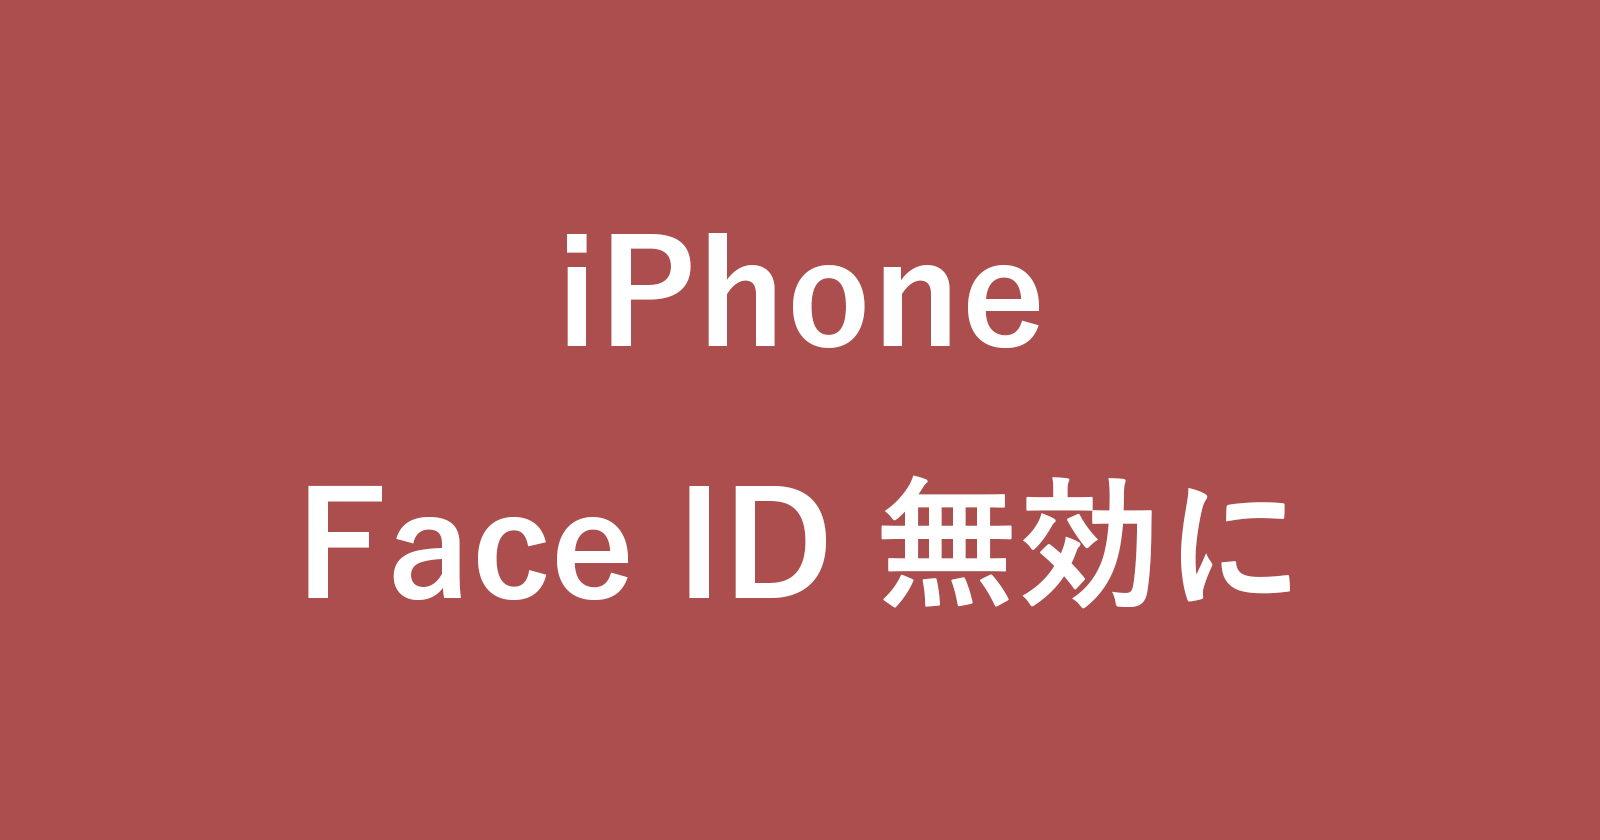 iphone disable face id